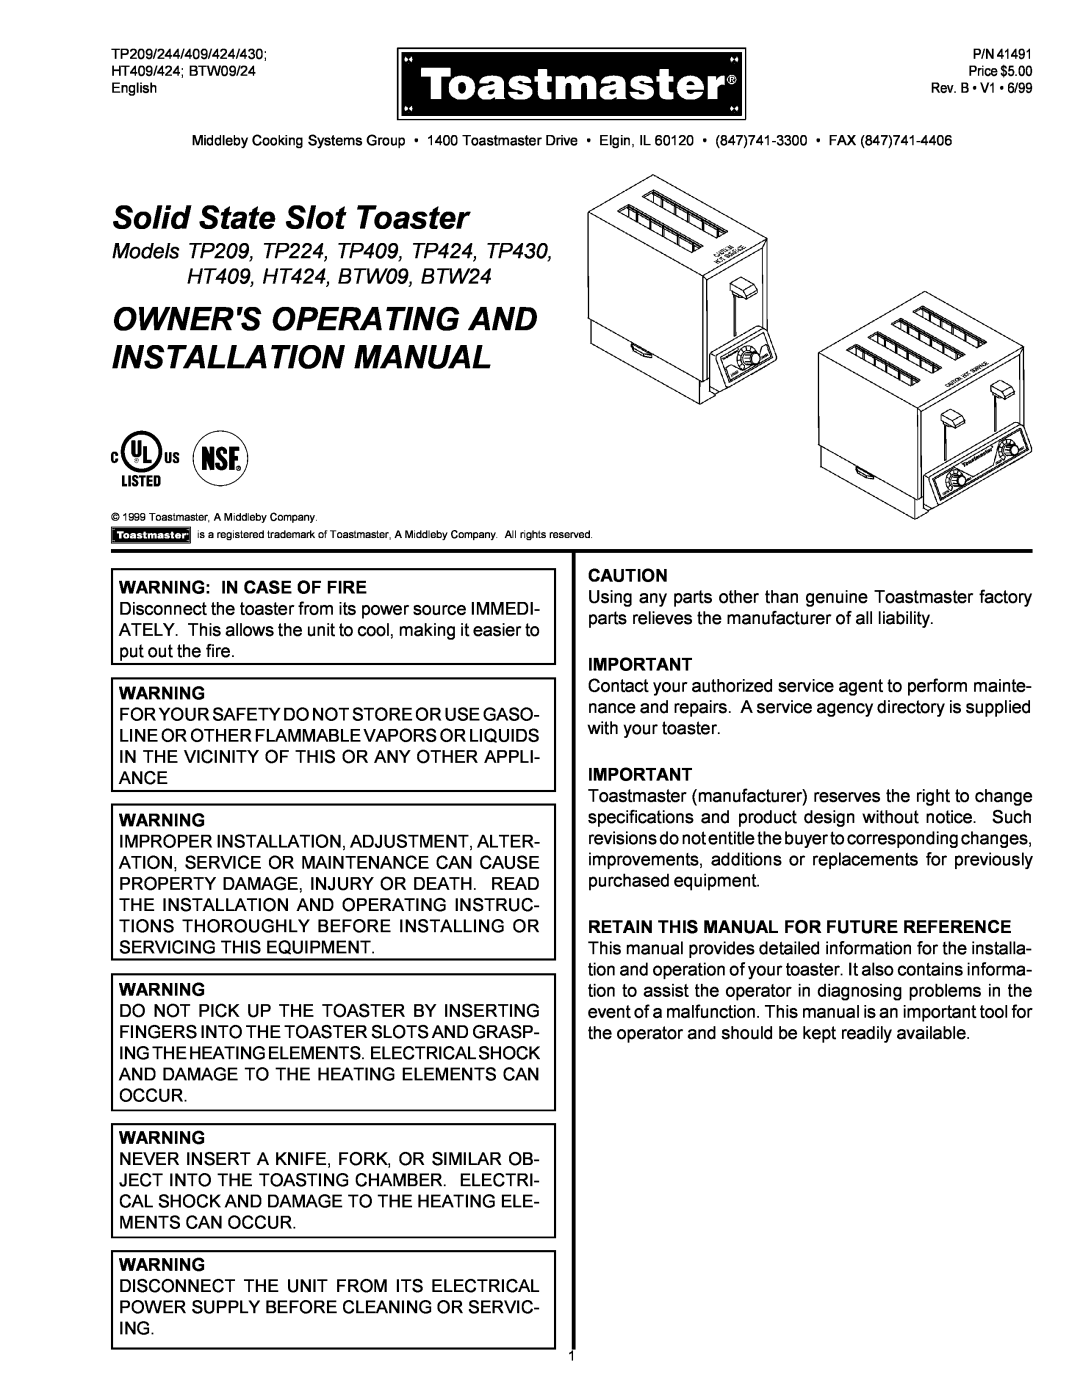 Toastmaster TP424, TP430, TP409 installation manual Solid State Slot Toaster, Owners Operating And Installation Manual 